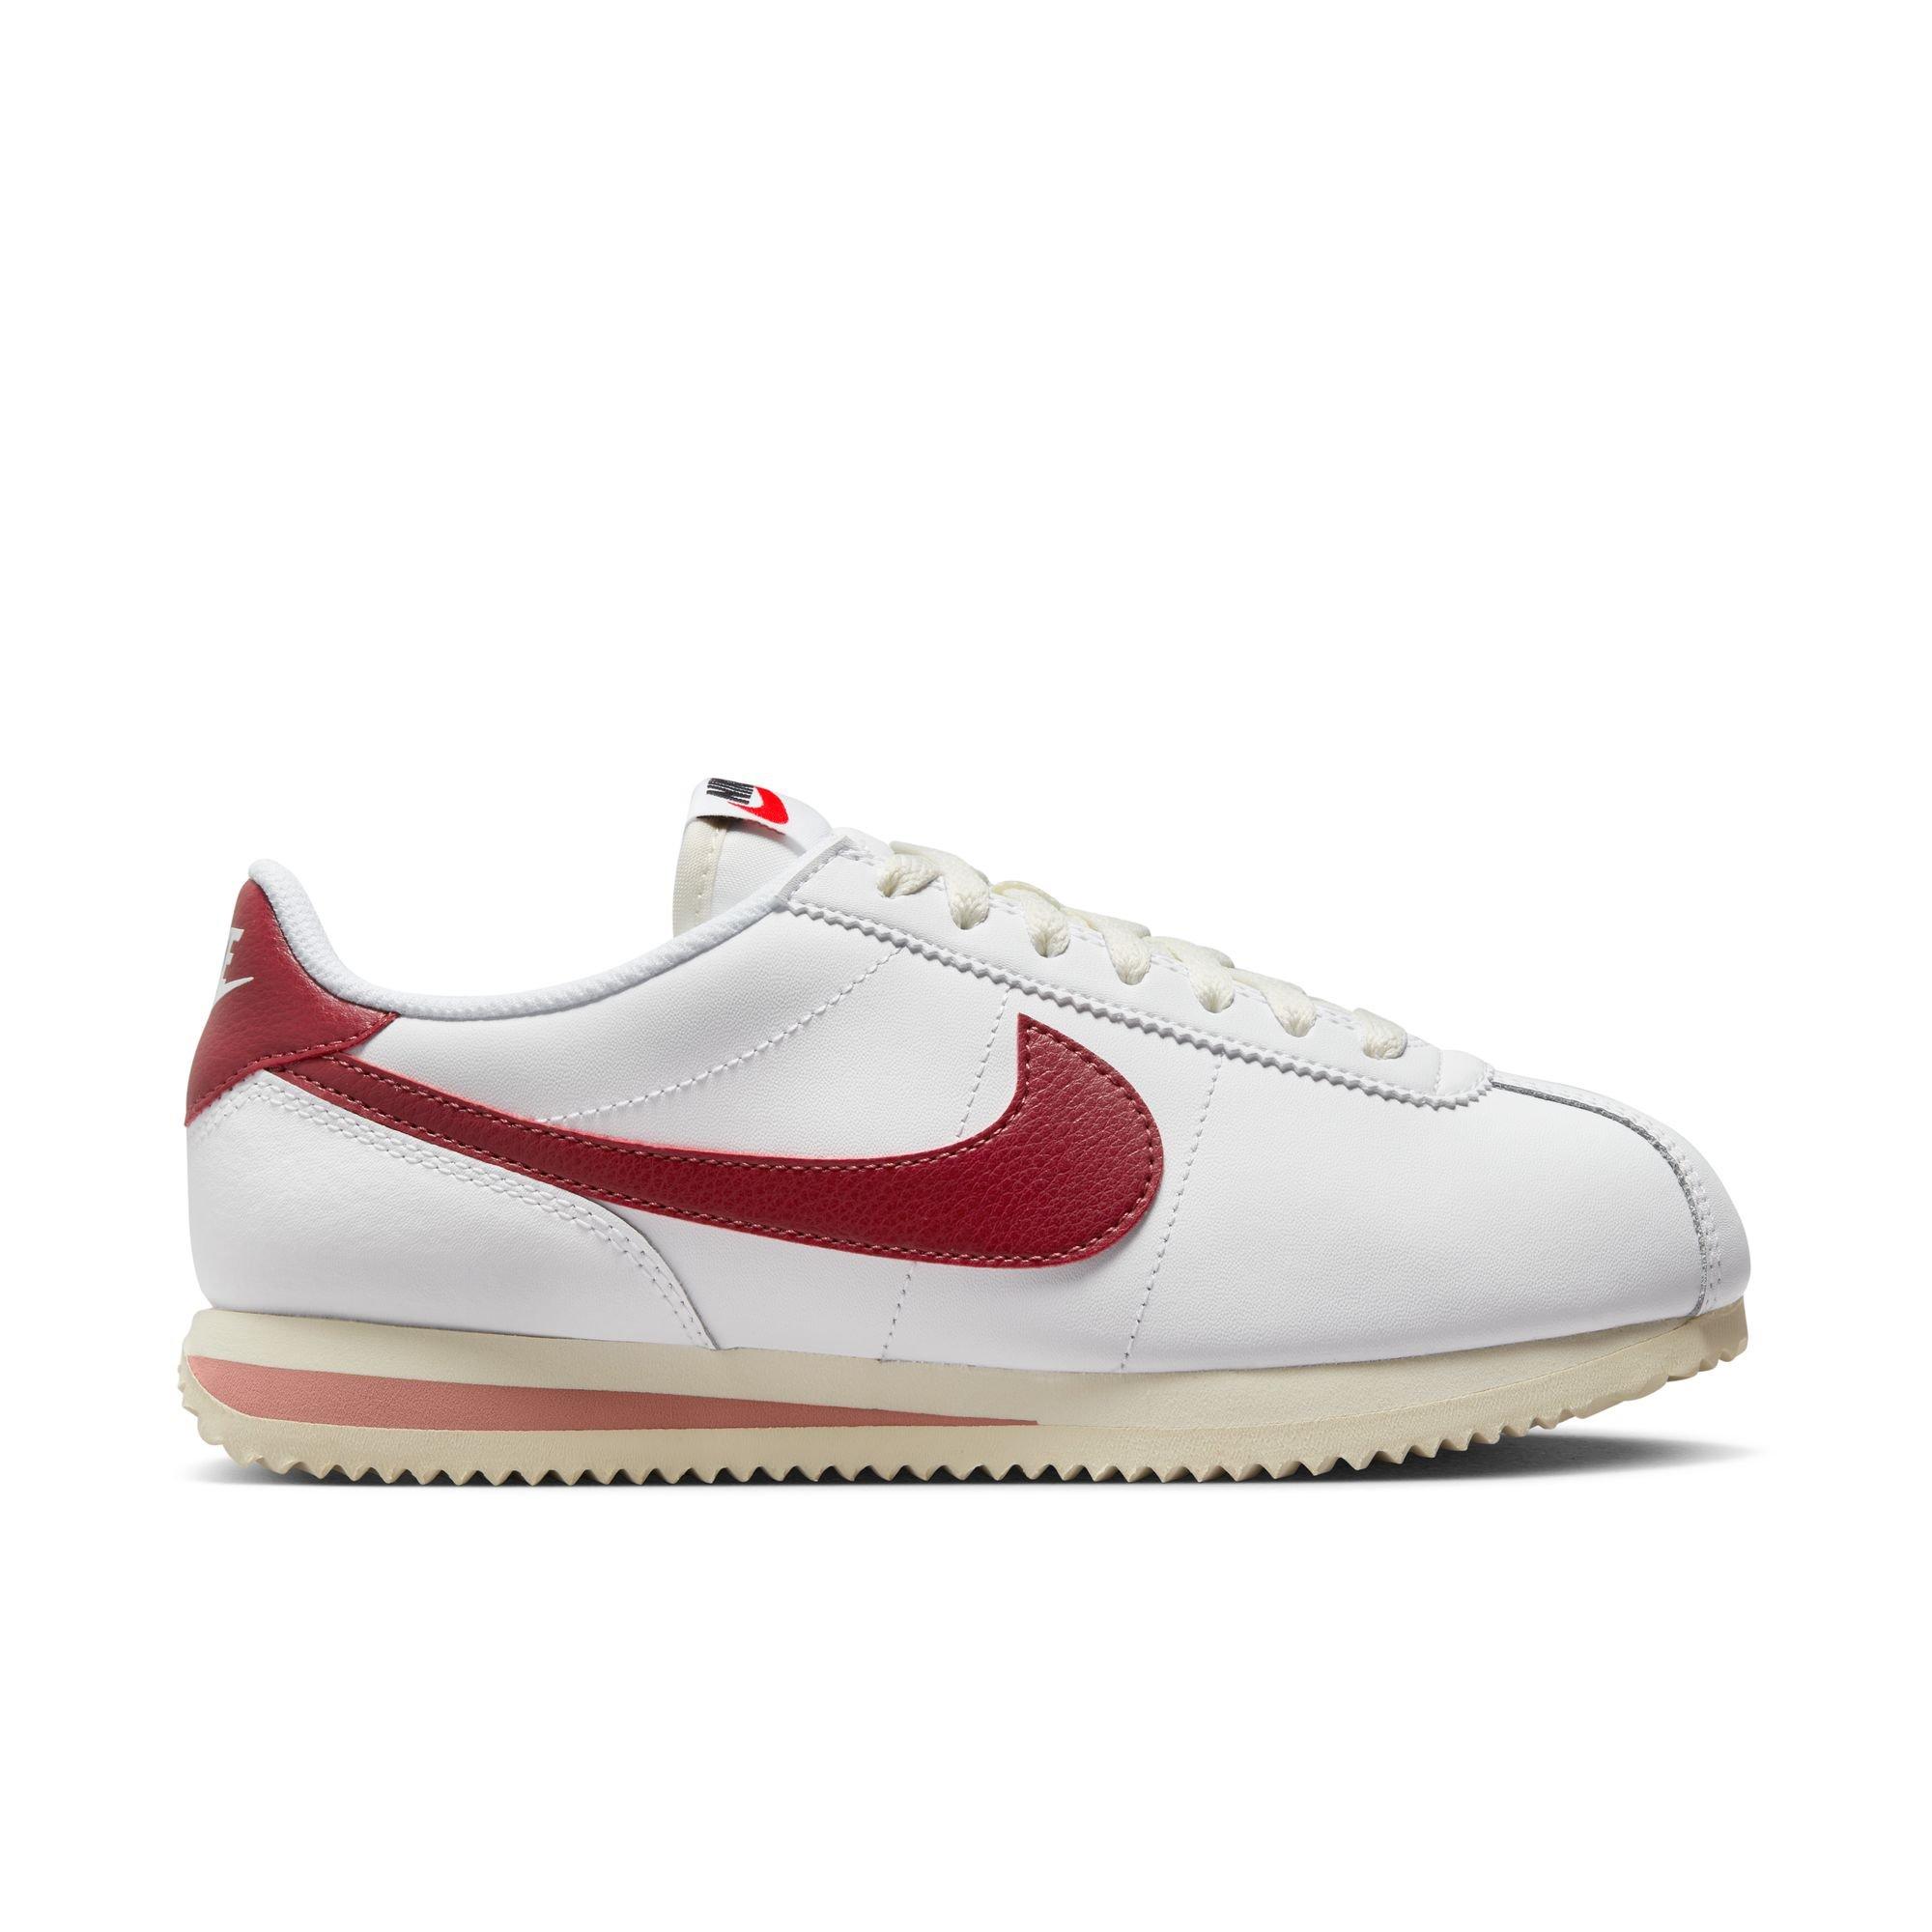 NIKE 1997 LEATHER CORTEZ RED